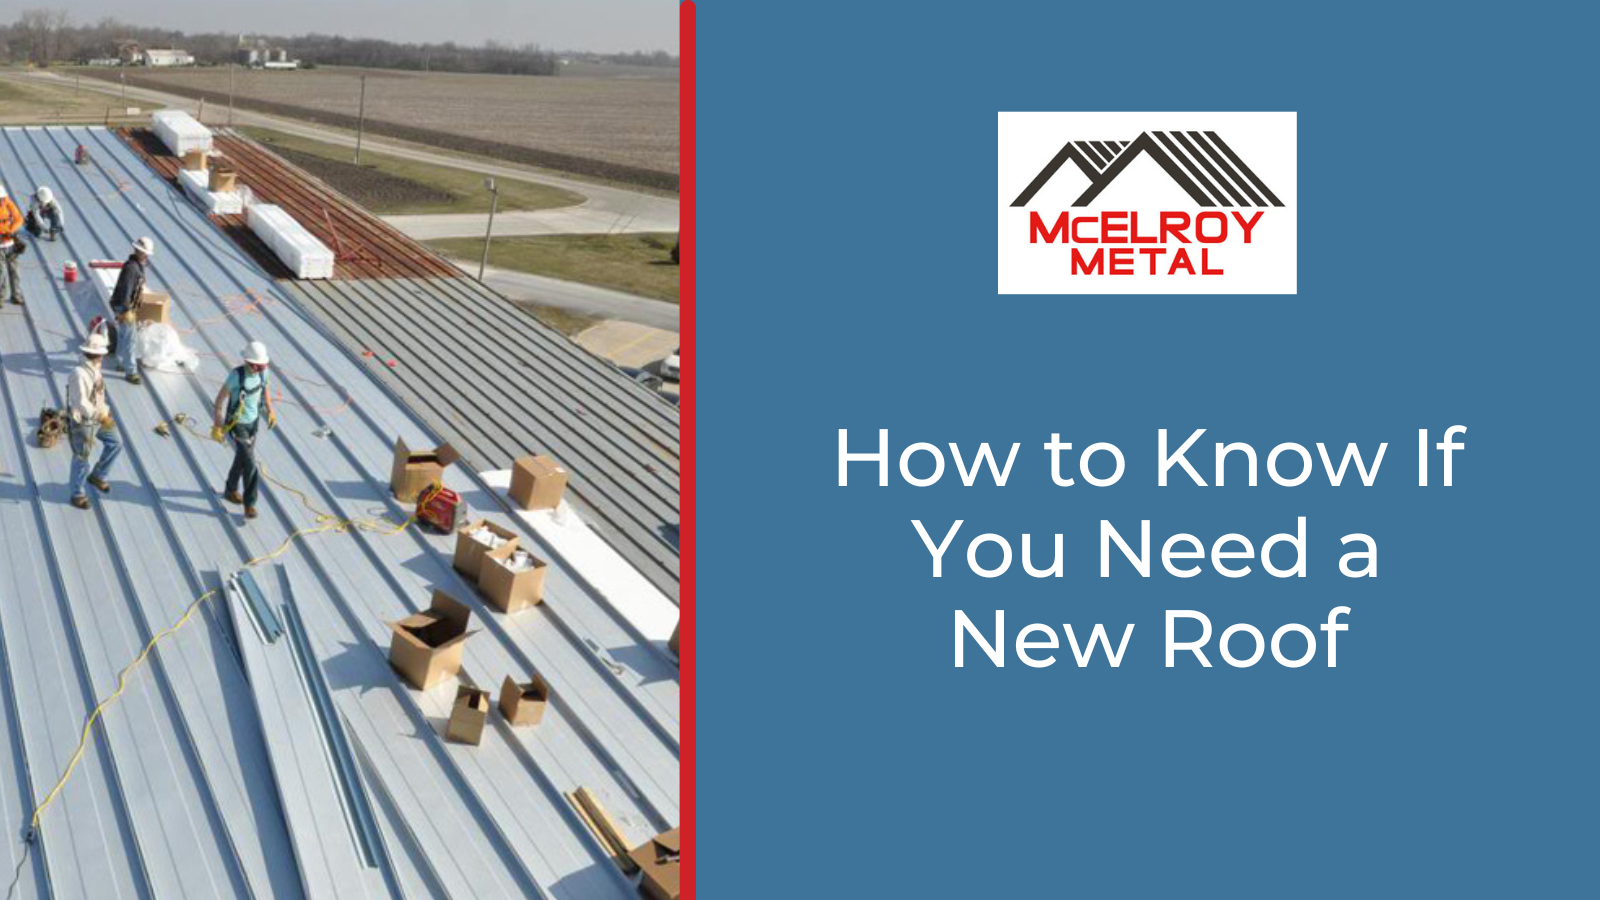 How to Know If You Need a New Roof